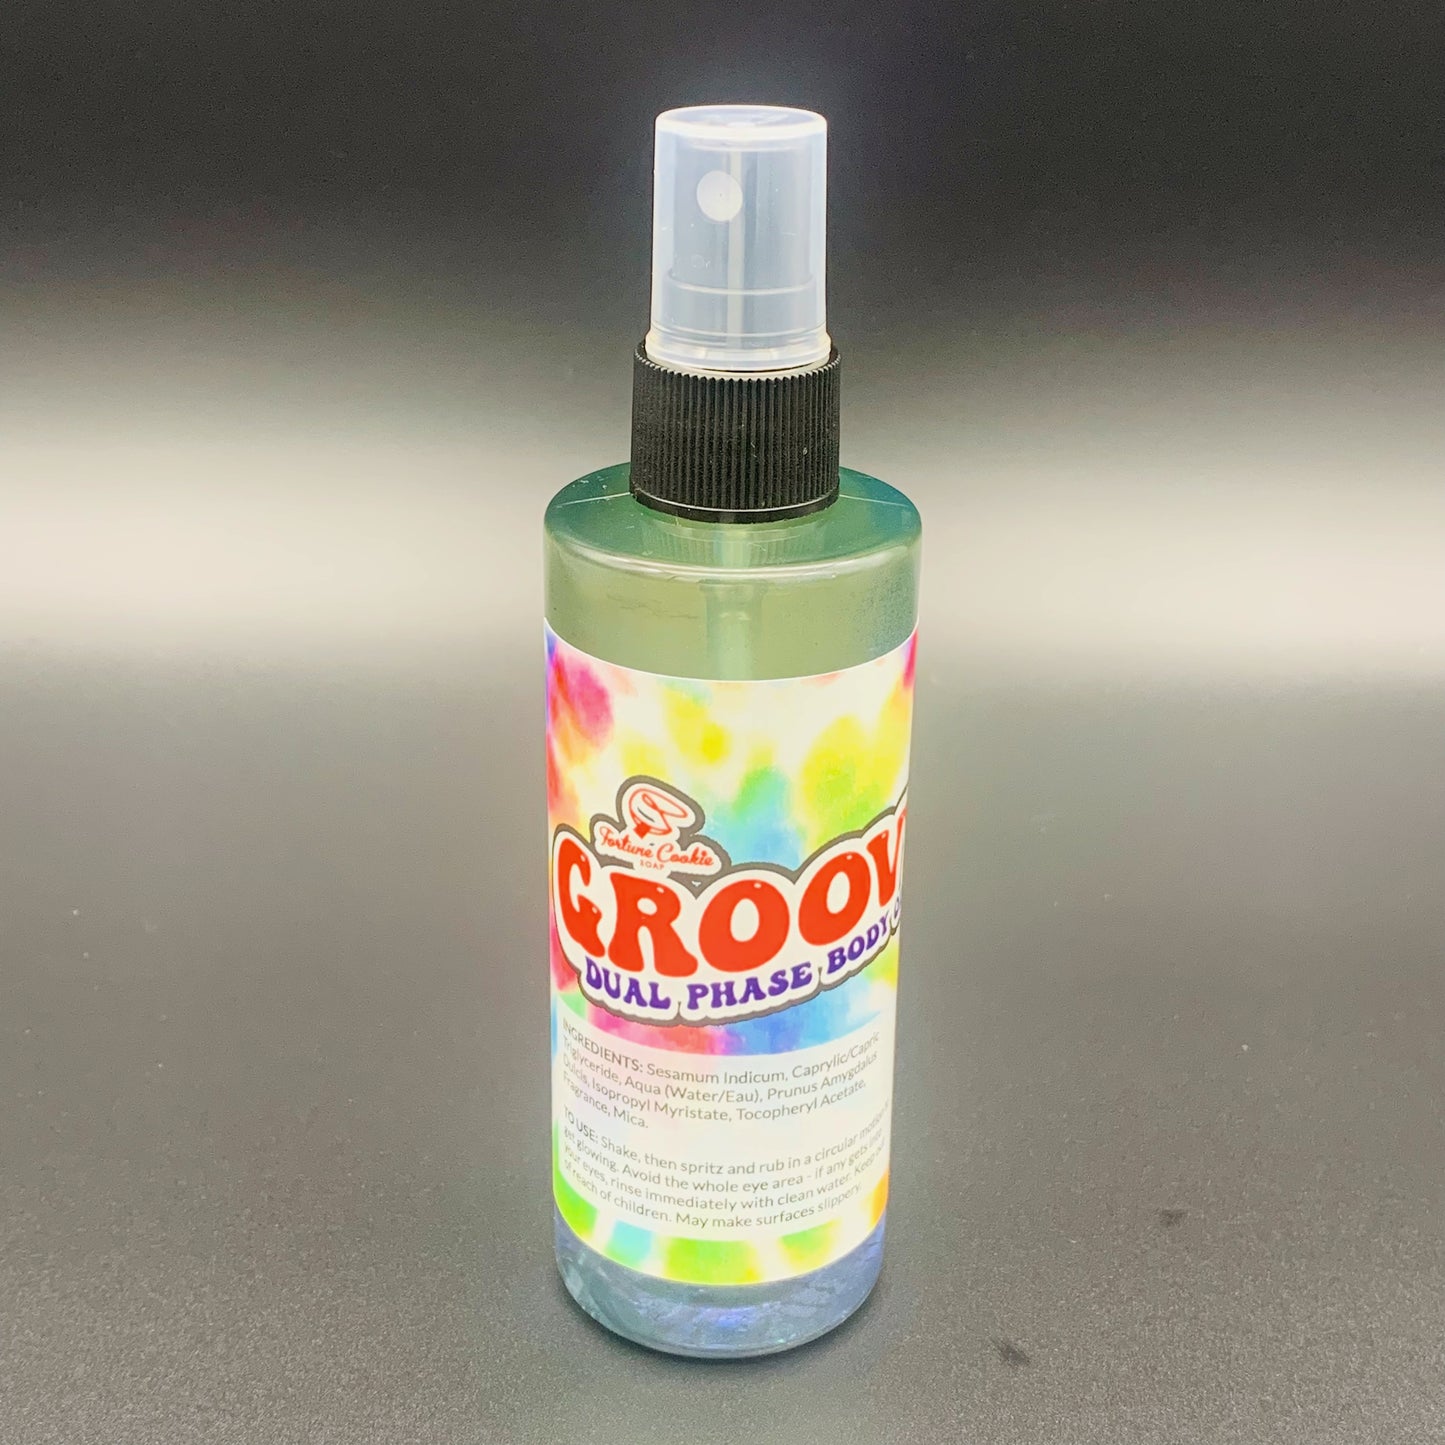 GROOVY Dual Phase Body Oil